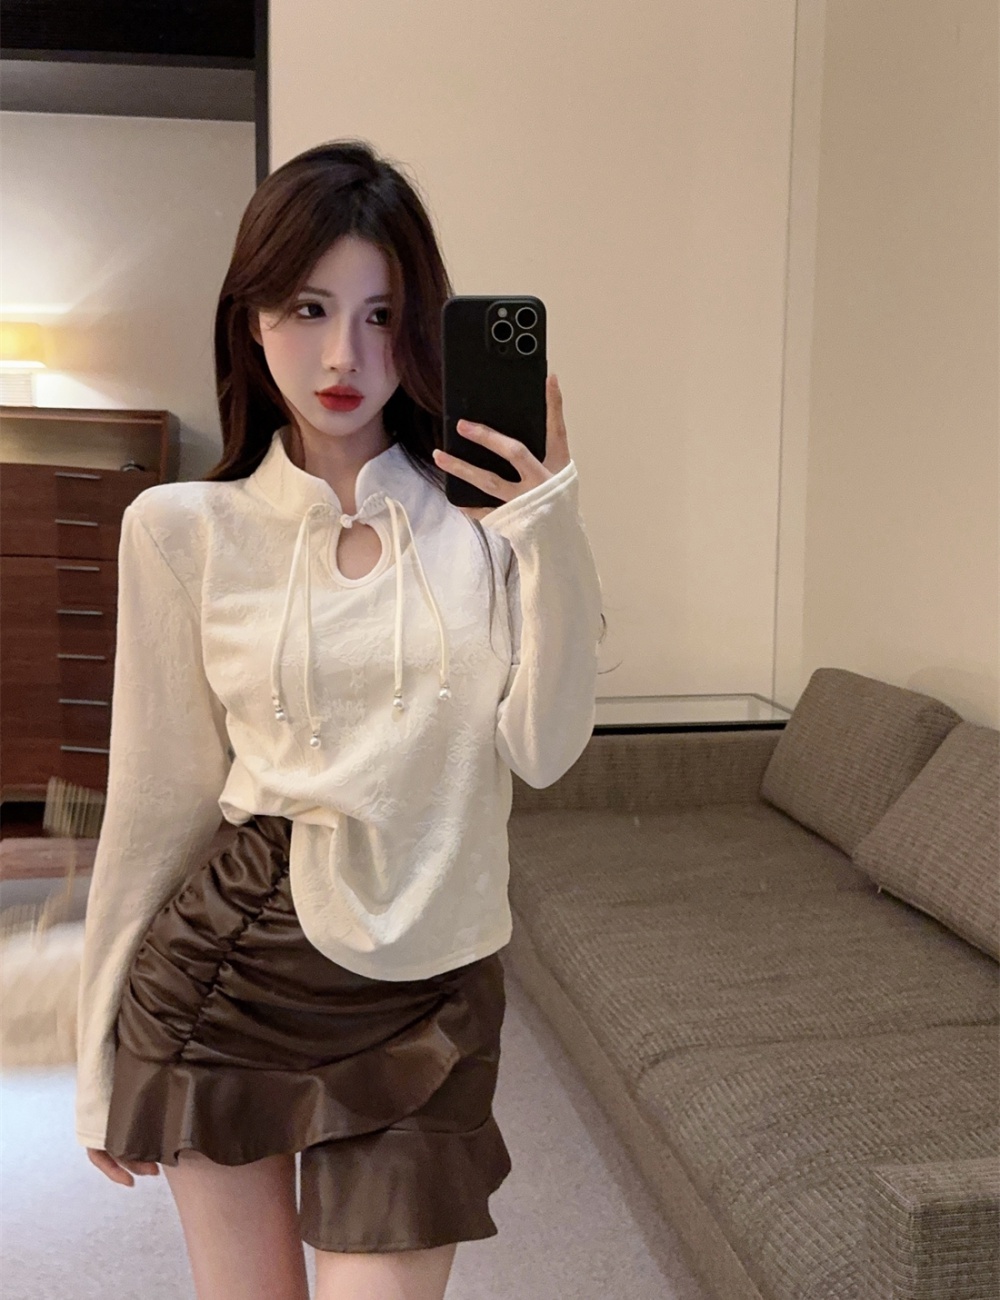 Western style leather skirt T-shirt 2pcs set for women